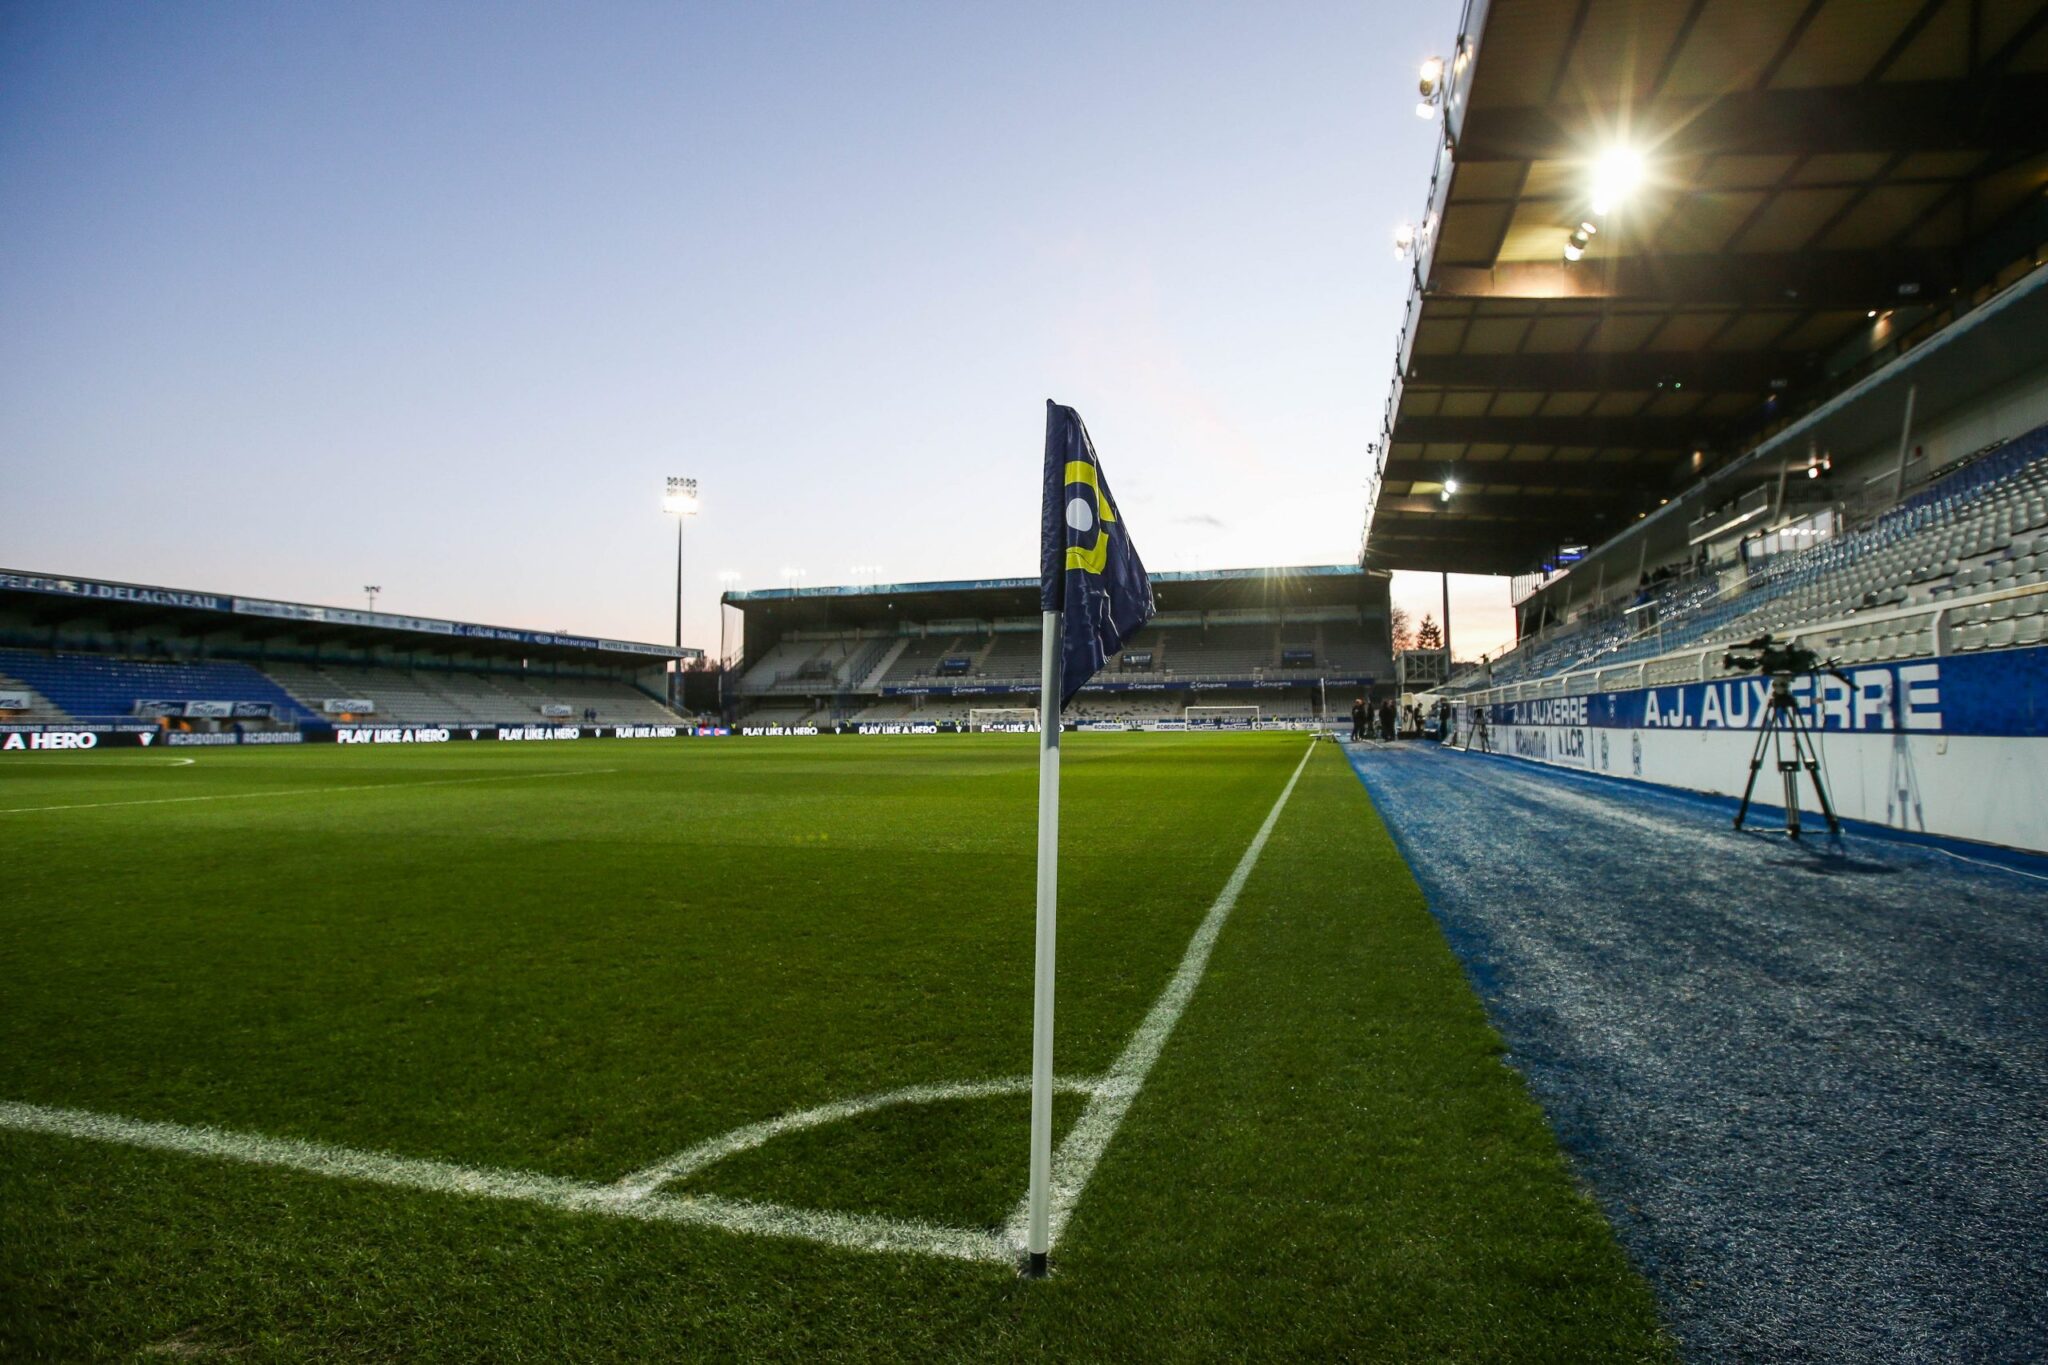 Mercato: Auxerre ready to pull off a nice move!